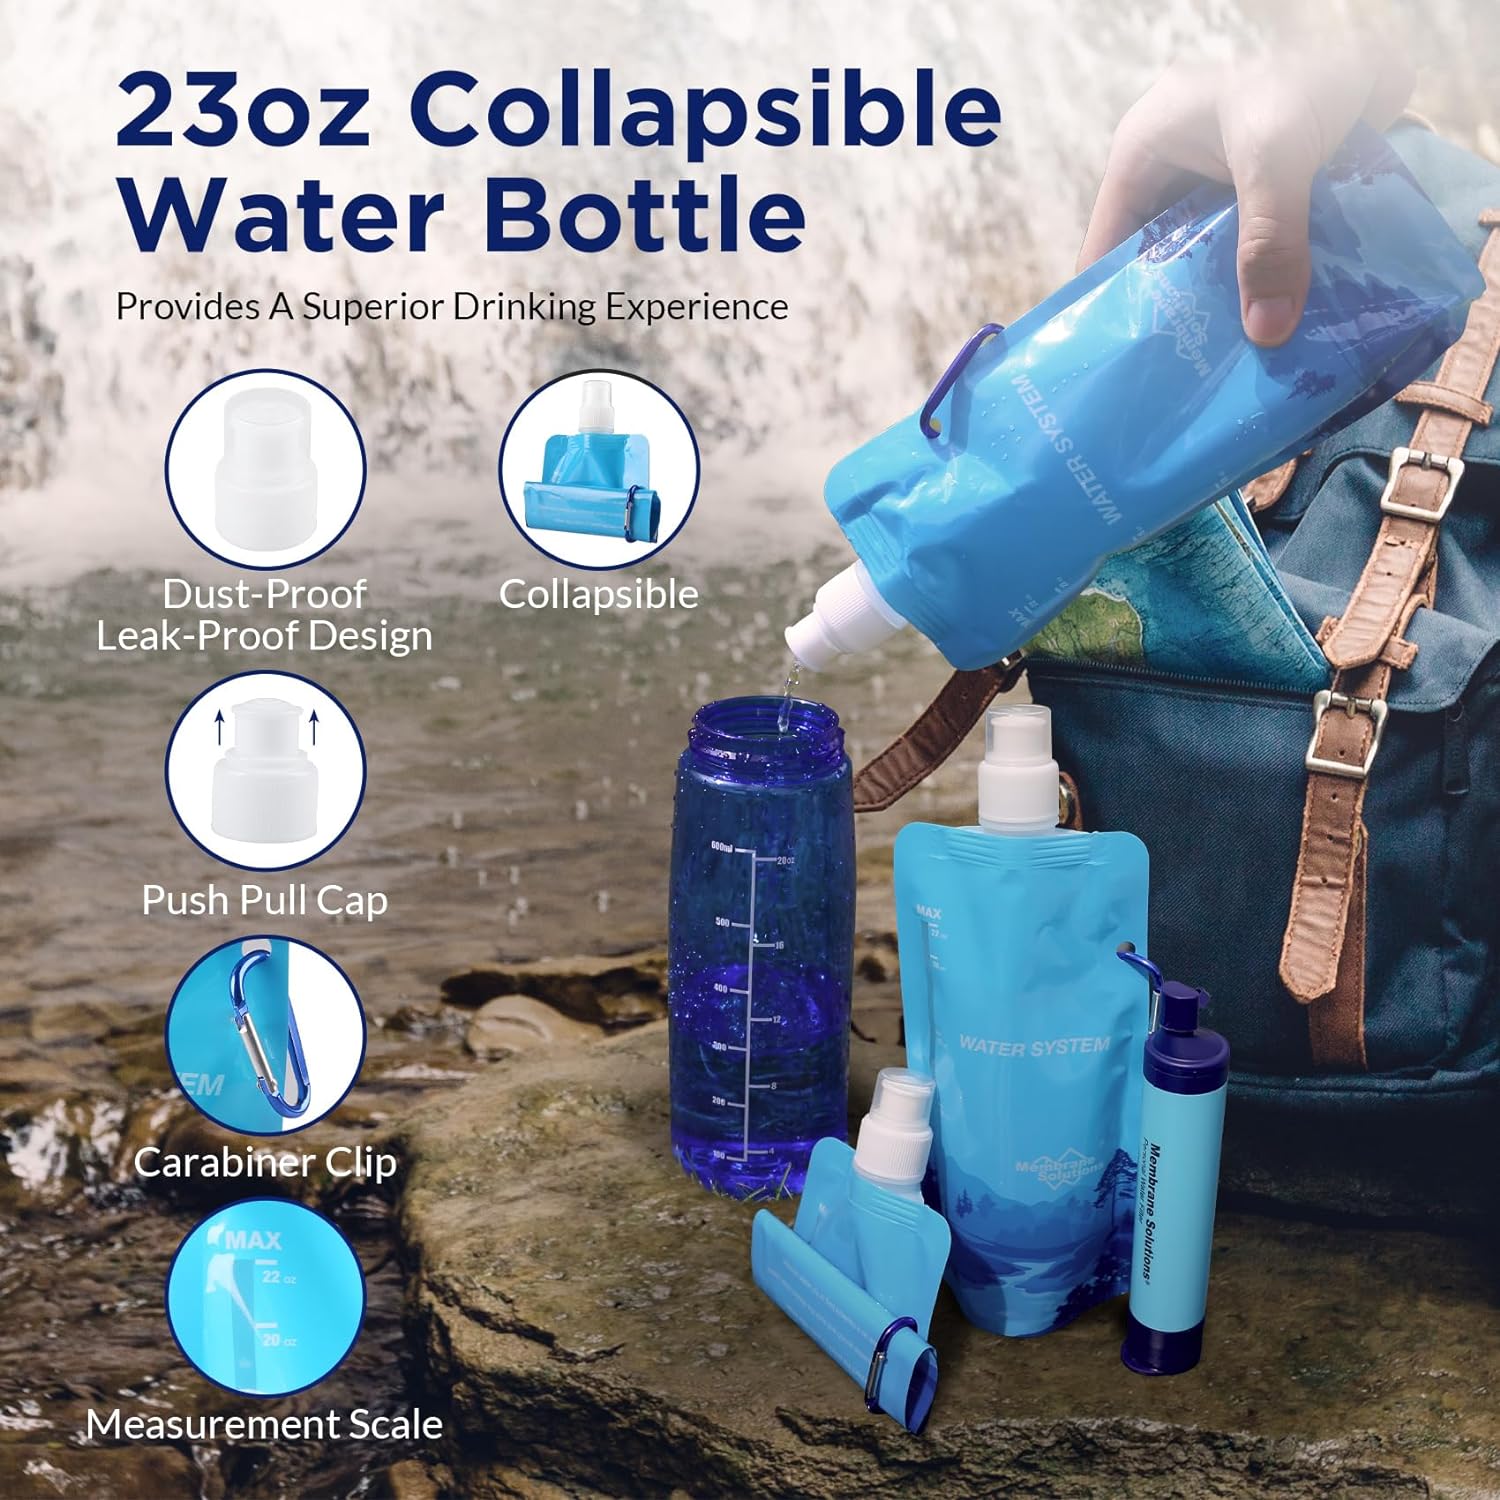 Membrane Solutions 23oz Collapsible Water Container Bottle Squeezable Pouch for Hiking Camping Travel Emergency 4 Pack